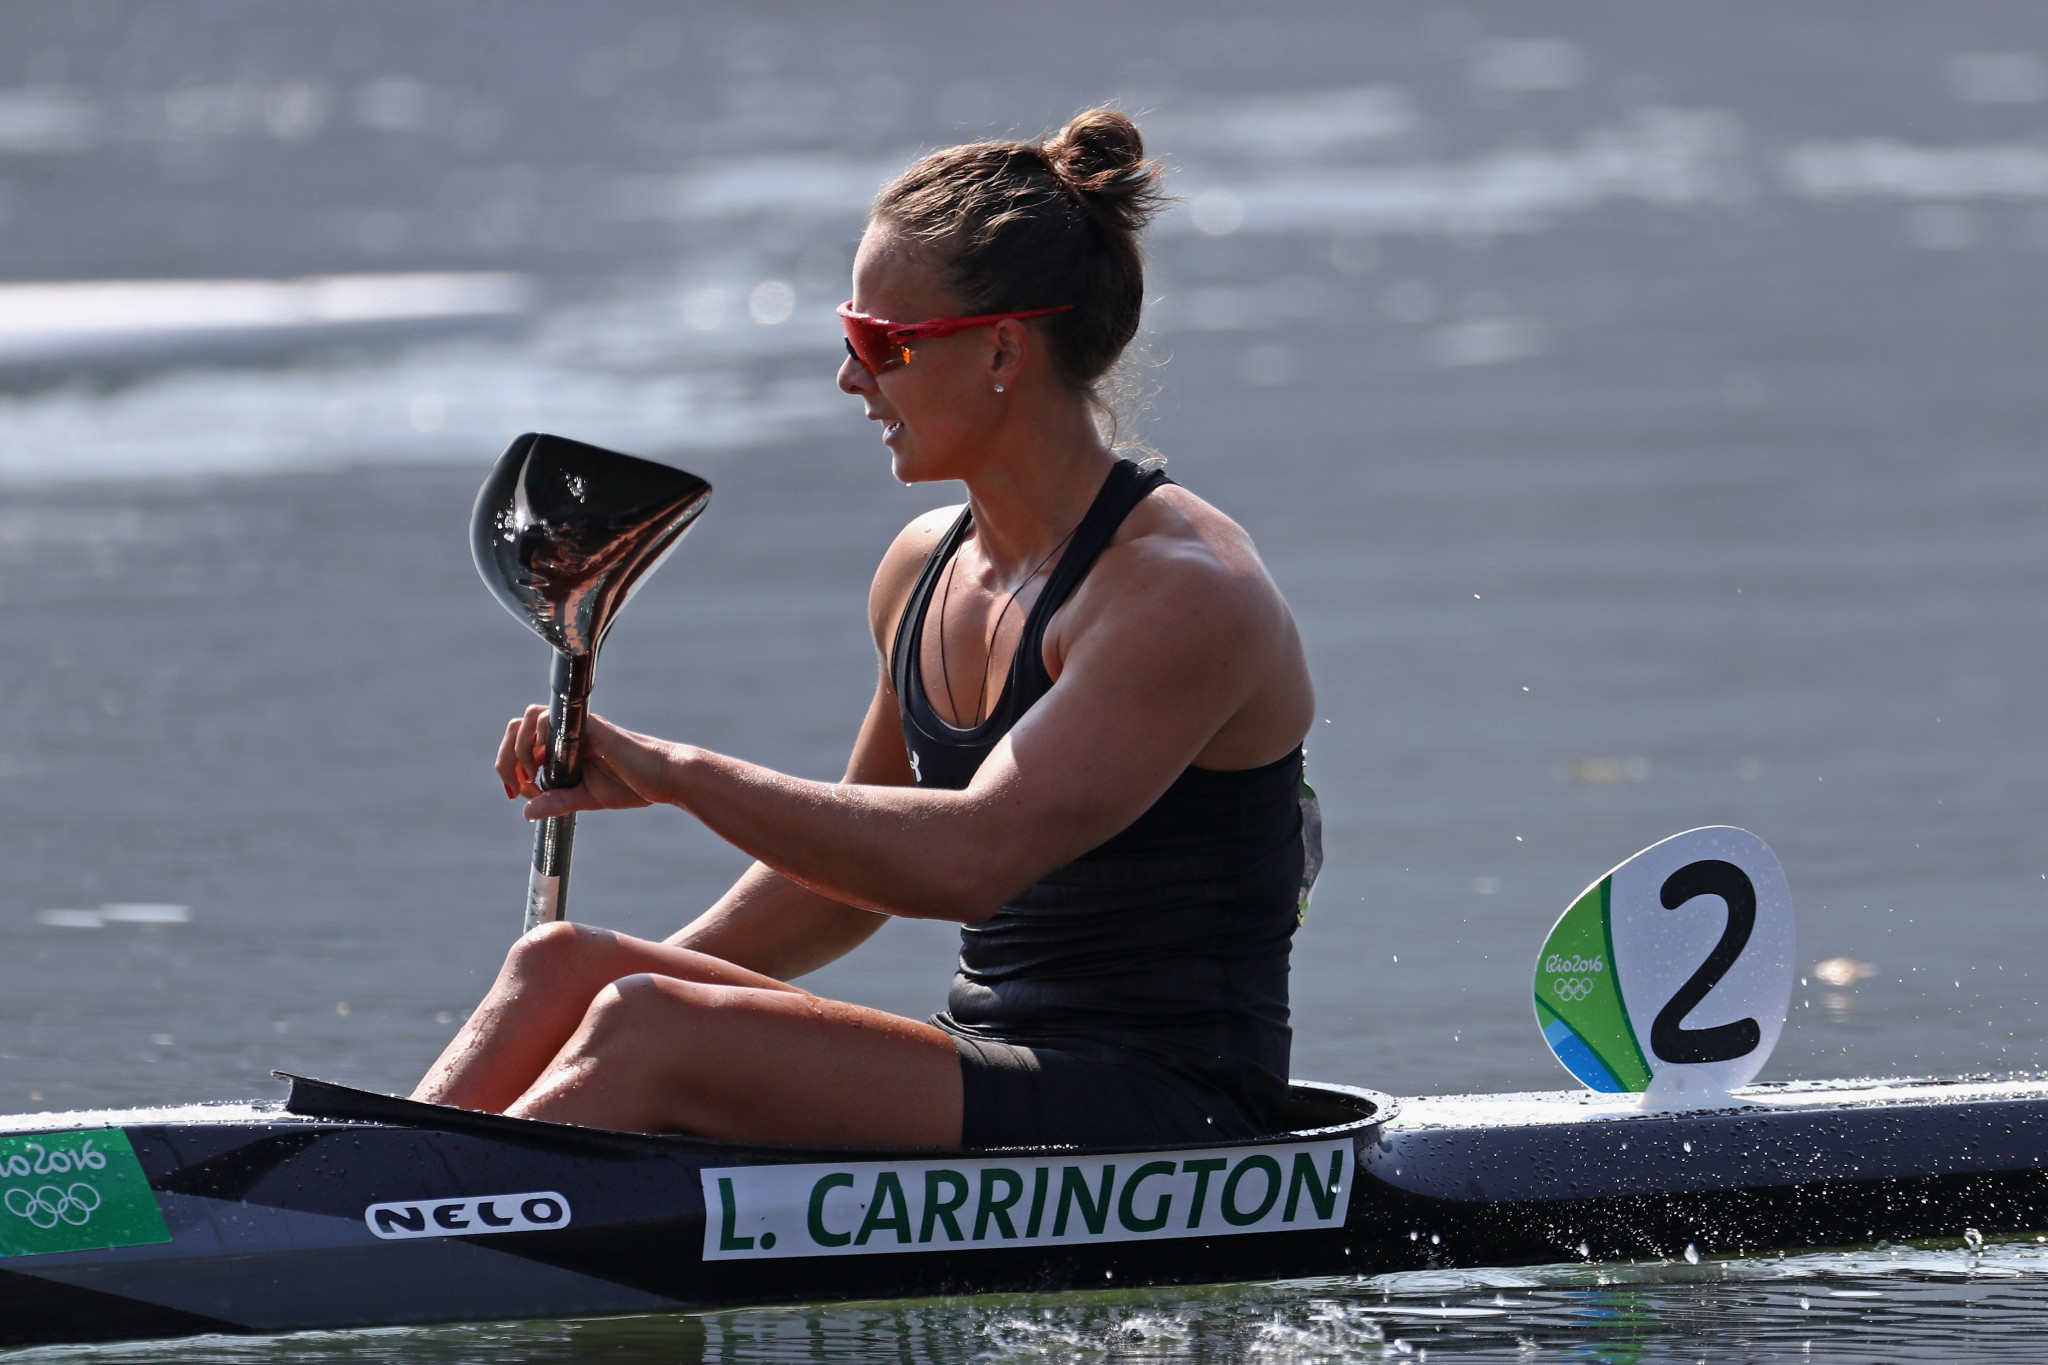 Lisa Carrington is a two-time Olympic champion, having won gold in the K1 200m at London 2012 and Rio 2016 ©Getty Images